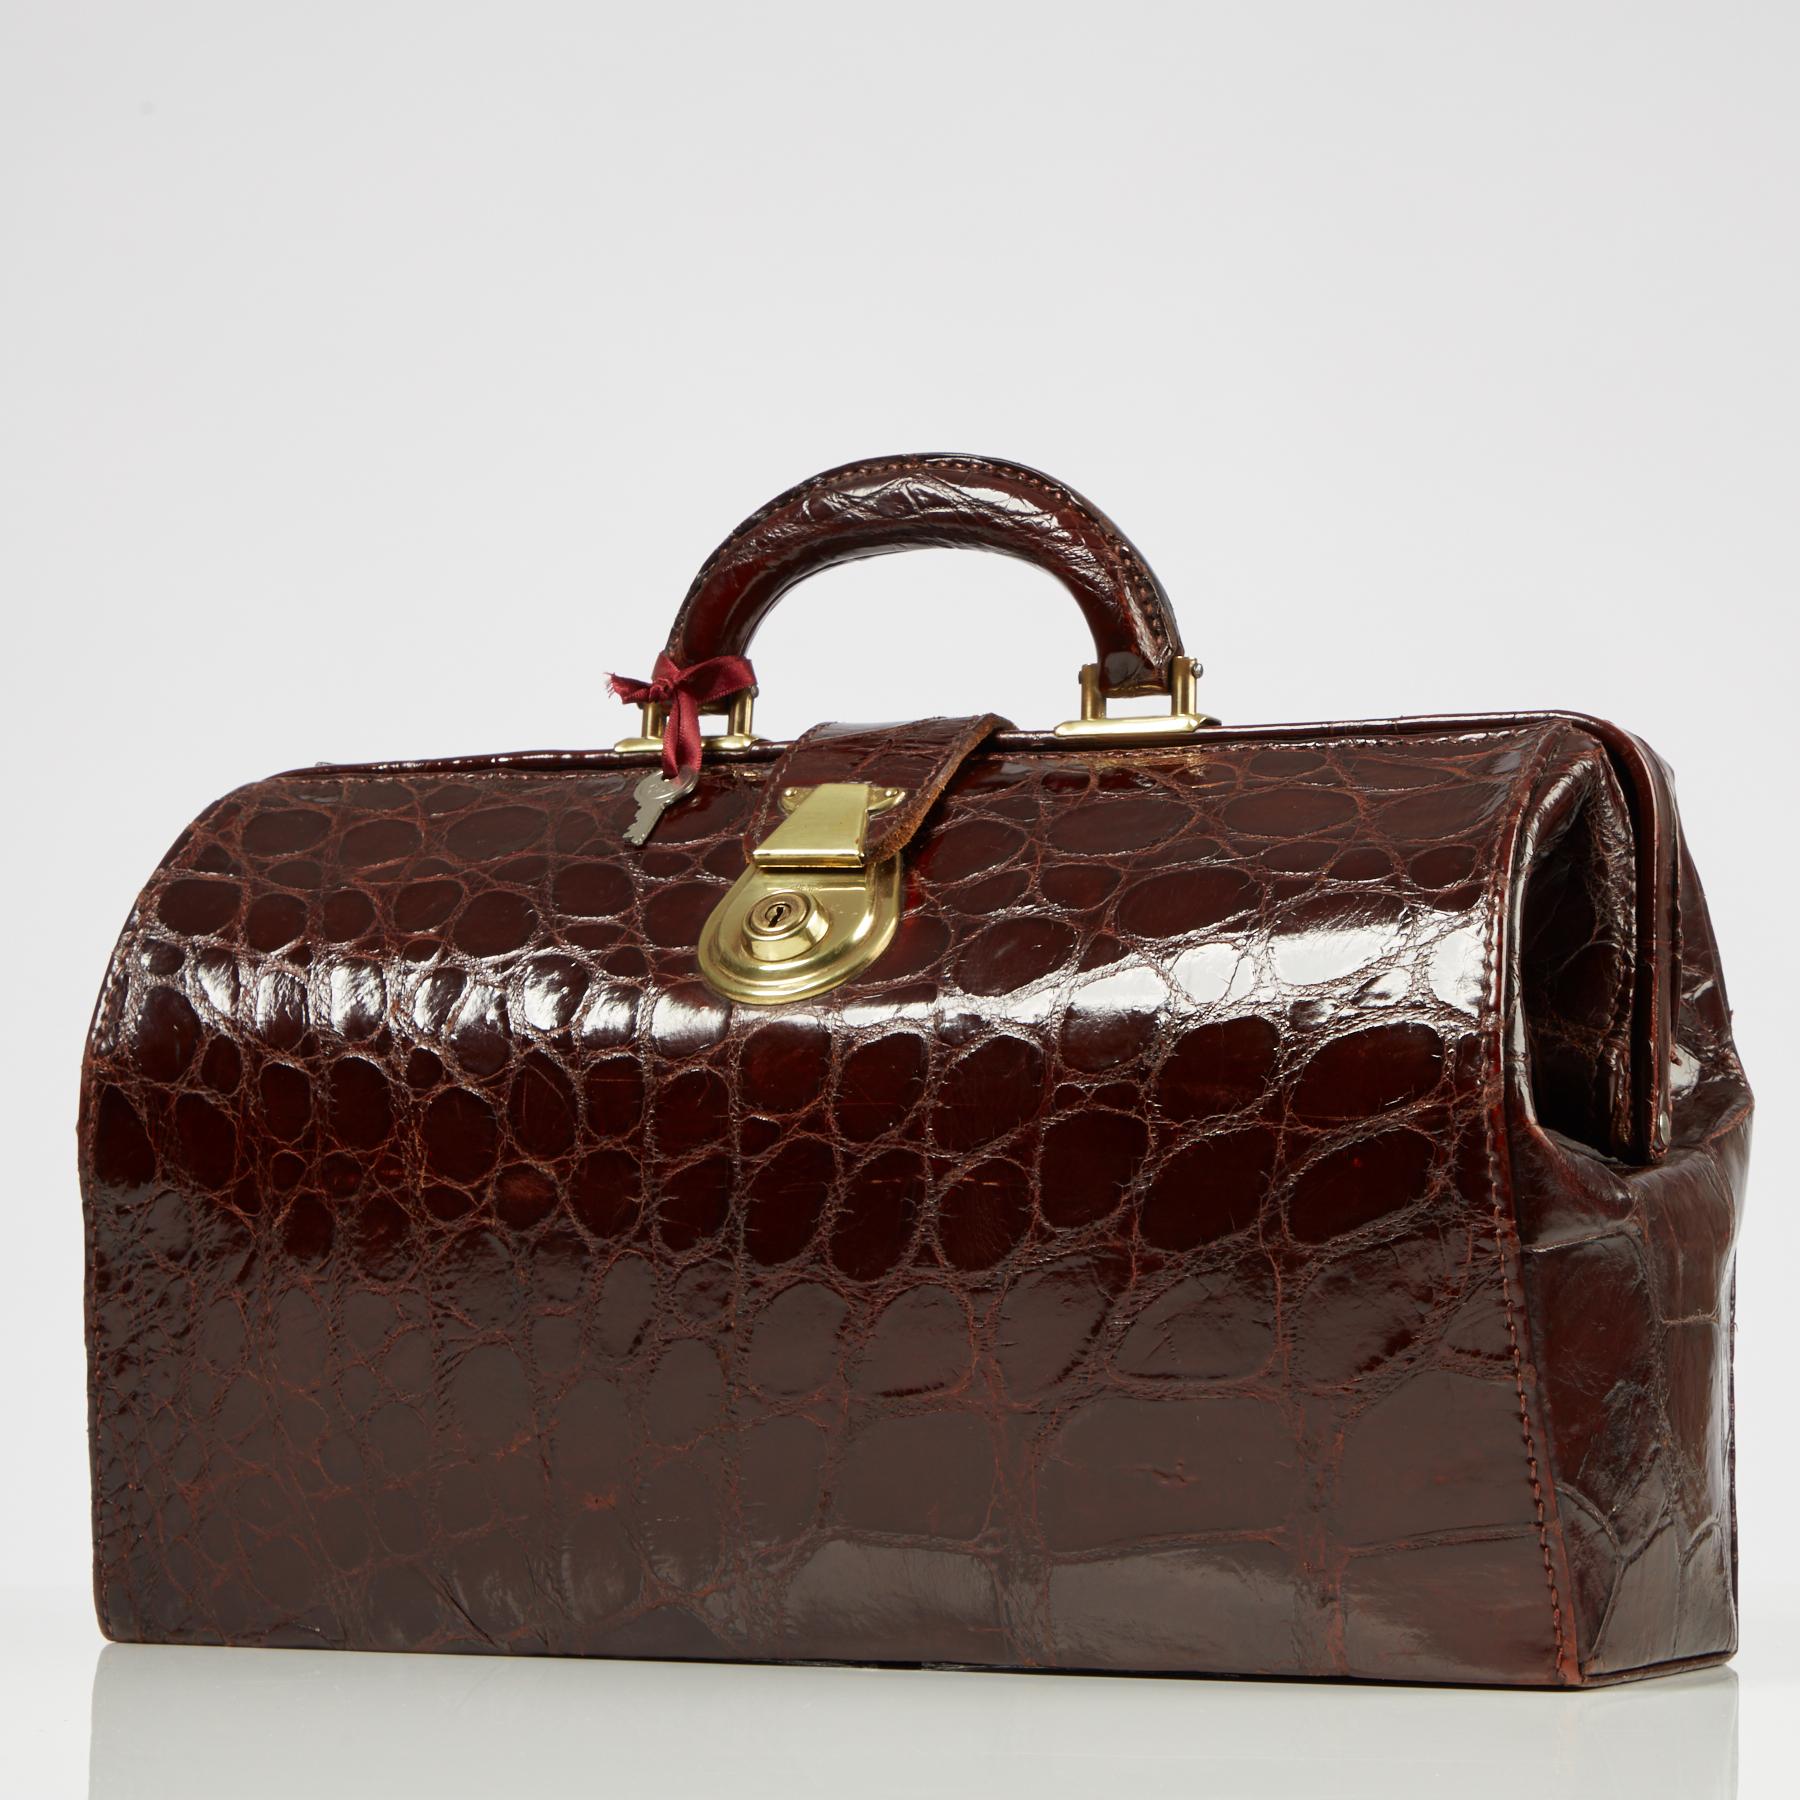 A wine color crocodile Gladstone bag complete with its original key.
Known as either a Gladstone bag or a doctors bag, it has been made in natural crocodile skin and is a deep ruby red in colour & the skin retains its original sheen.
You can tell